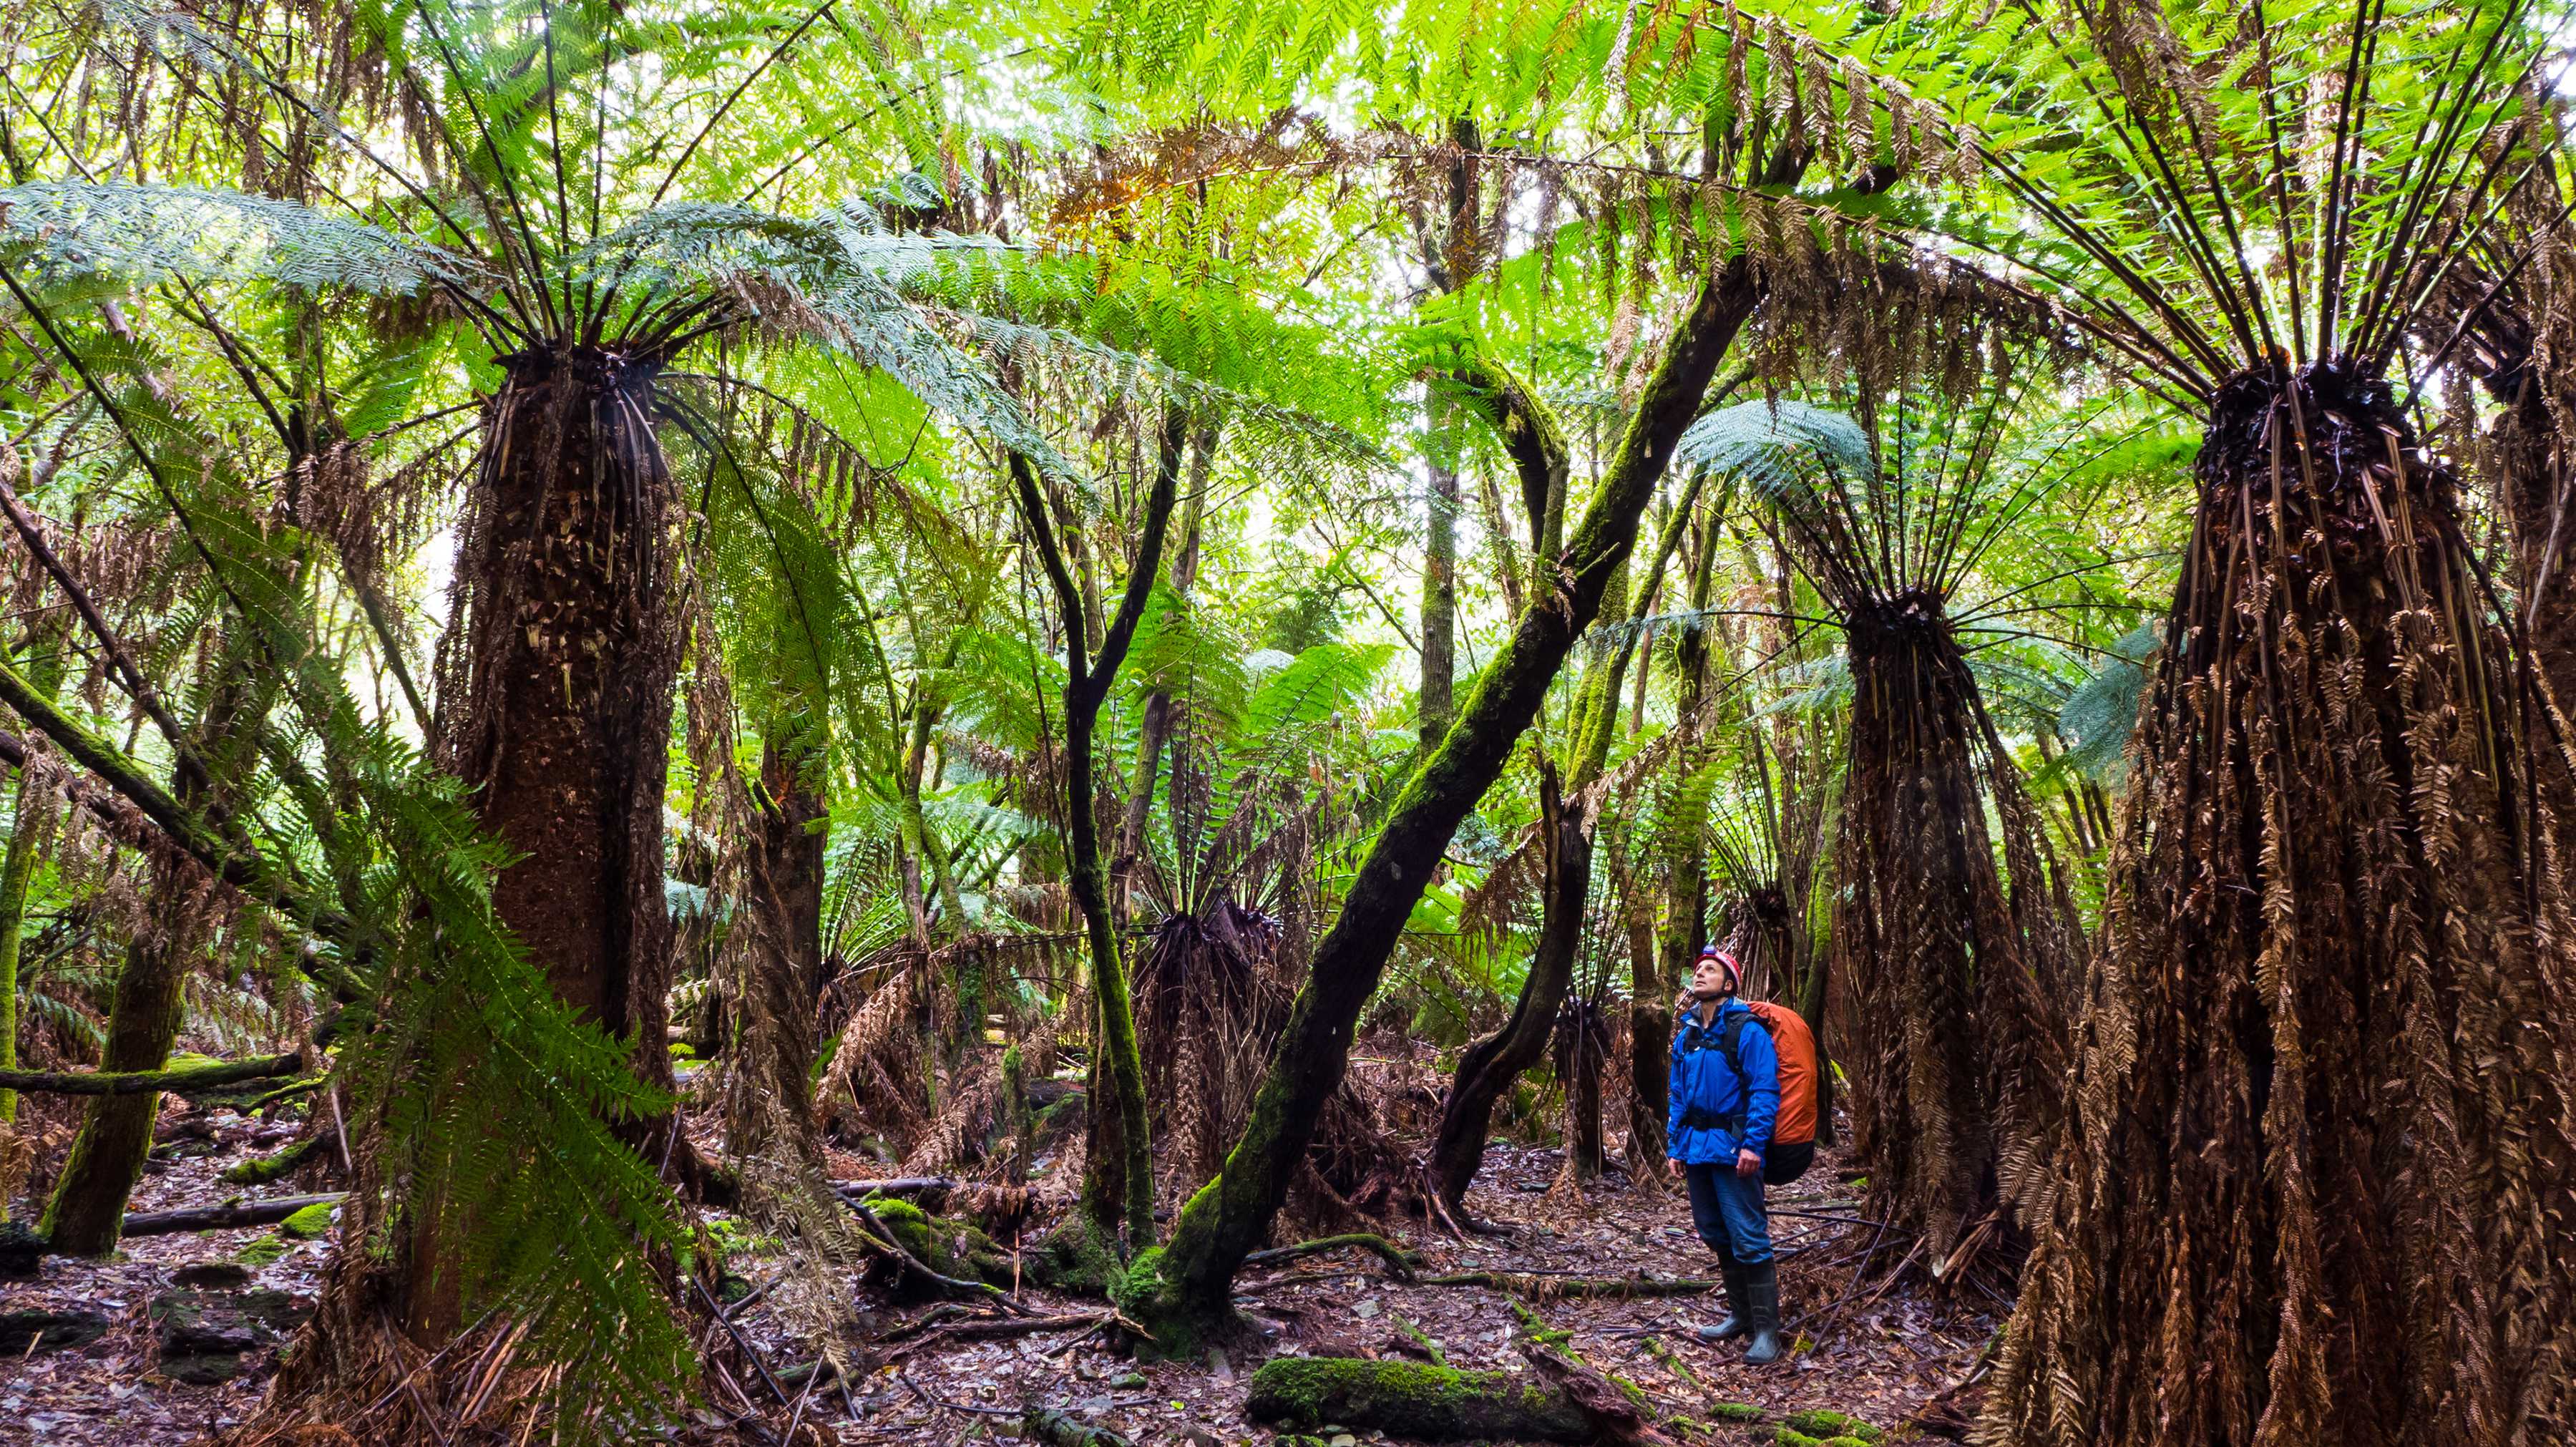 A forest of Tasmanian Tree Ferns. These ferns have brown trunks twice as tall as a person. From the top of the trunks are large fronds. These fronds make a beautiful green canopy. Standing in the forest of tree ferns as a person, why are wearing blue with a red hiking pack. The red and blue is a great splash of colour against the green and brown of the ferns. Photo: Joe Shemesh.